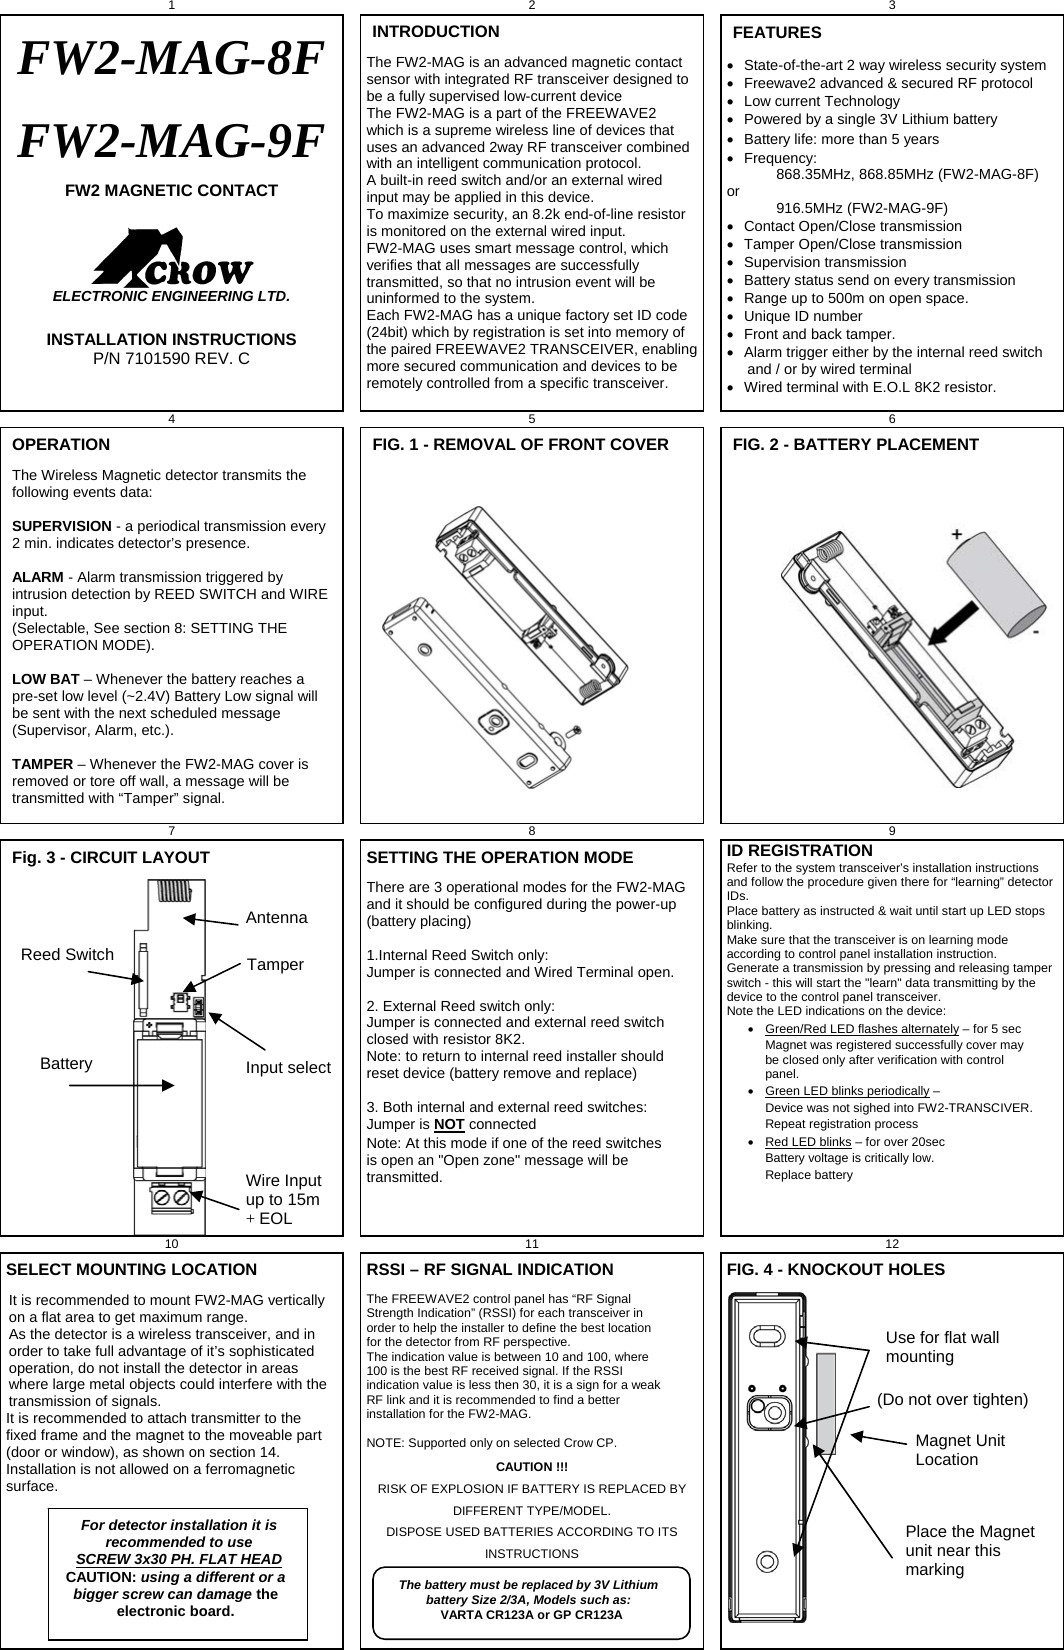 1 2 3 FW2-MAG-8F FW2-MAG-9F FW2 MAGNETIC CONTACT     ELECTRONIC ENGINEERING LTD.  INSTALLATION INSTRUCTIONS P/N 7101590 REV. C INTRODUCTION The FW2-MAG is an advanced magnetic contact sensor with integrated RF transceiver designed to be a fully supervised low-current device  The FW2-MAG is a part of the FREEWAVE2 which is a supreme wireless line of devices that uses an advanced 2way RF transceiver combined with an intelligent communication protocol. A built-in reed switch and/or an external wired input may be applied in this device.  To maximize security, an 8.2k end-of-line resistor is monitored on the external wired input.  FW2-MAG uses smart message control, which verifies that all messages are successfully transmitted, so that no intrusion event will be uninformed to the system. Each FW2-MAG has a unique factory set ID code (24bit) which by registration is set into memory of the paired FREEWAVE2 TRANSCEIVER, enabling more secured communication and devices to be remotely controlled from a specific transceiver.     FEATURES   State-of-the-art 2 way wireless security system   Freewave2 advanced &amp; secured RF protocol   Low current Technology   Powered by a single 3V Lithium battery   Battery life: more than 5 years  Frequency:              868.35MHz, 868.85MHz (FW2-MAG-8F) or              916.5MHz (FW2-MAG-9F)   Contact Open/Close transmission   Tamper Open/Close transmission  Supervision transmission   Battery status send on every transmission   Range up to 500m on open space.   Unique ID number   Front and back tamper.   Alarm trigger either by the internal reed switch       and / or by wired terminal    Wired terminal with E.O.L 8K2 resistor. 4 5   6 OPERATION The Wireless Magnetic detector transmits the following events data:  SUPERVISION - a periodical transmission every 2 min. indicates detector’s presence.  ALARM - Alarm transmission triggered by intrusion detection by REED SWITCH and WIRE input. (Selectable, See section 8: SETTING THE OPERATION MODE).  LOW BAT – Whenever the battery reaches a pre-set low level (~2.4V) Battery Low signal will be sent with the next scheduled message (Supervisor, Alarm, etc.).  TAMPER – Whenever the FW2-MAG cover is removed or tore off wall, a message will be transmitted with “Tamper” signal.  FIG. 1 - REMOVAL OF FRONT COVER   FIG. 2 - BATTERY PLACEMENT   7 8   9 Fig. 3 - CIRCUIT LAYOUT                            SETTING THE OPERATION MODE There are 3 operational modes for the FW2-MAG and it should be configured during the power-up (battery placing)  1.Internal Reed Switch only:  Jumper is connected and Wired Terminal open.  2. External Reed switch only: Jumper is connected and external reed switch closed with resistor 8K2. Note: to return to internal reed installer should reset device (battery remove and replace)  3. Both internal and external reed switches: Jumper is NOT connected Note: At this mode if one of the reed switches is open an &quot;Open zone&quot; message will be transmitted. ID REGISTRATIONRefer to the system transceiver’s installation instructions and follow the procedure given there for “learning” detector IDs.  Place battery as instructed &amp; wait until start up LED stops blinking. Make sure that the transceiver is on learning mode according to control panel installation instruction. Generate a transmission by pressing and releasing tamper switch - this will start the &quot;learn&quot; data transmitting by the device to the control panel transceiver.  Note the LED indications on the device:    Green/Red LED flashes alternately – for 5 sec     Magnet was registered successfully cover may be closed only after verification with control panel.   Green LED blinks periodically – Device was not sighed into FW2-TRANSCIVER.   Repeat registration process   Red LED blinks – for over 20sec Battery voltage is critically low.  Replace battery  10   11 12 SELECT MOUNTING LOCATION It is recommended to mount FW2-MAG vertically on a flat area to get maximum range. As the detector is a wireless transceiver, and in order to take full advantage of it’s sophisticated operation, do not install the detector in areas where large metal objects could interfere with the transmission of signals.   It is recommended to attach transmitter to the fixed frame and the magnet to the moveable part (door or window), as shown on section 14. Installation is not allowed on a ferromagnetic surface.    RSSI – RF SIGNAL INDICATION The FREEWAVE2 control panel has “RF Signal Strength Indication” (RSSI) for each transceiver in order to help the installer to define the best location for the detector from RF perspective. The indication value is between 10 and 100, where 100 is the best RF received signal. If the RSSI indication value is less then 30, it is a sign for a weak RF link and it is recommended to find a better installation for the FW2-MAG.   NOTE: Supported only on selected Crow CP.   CAUTION !!! RISK OF EXPLOSION IF BATTERY IS REPLACED BY DIFFERENT TYPE/MODEL.  DISPOSE USED BATTERIES ACCORDING TO ITS INSTRUCTIONS   FIG. 4 - KNOCKOUT HOLES     Reed Switch Antenna Wire Input up to 15m + EOL Battery Tamper Input select Use for flat wall mounting Place the Magnet unit near this marking Magnet Unit Location (Do not over tighten) For detector installation it is recommended to use  SCREW 3x30 PH. FLAT HEAD CAUTION: using a different or a bigger screw can damage the electronic board. The battery must be replaced by 3V Lithium battery Size 2/3A, Models such as: VARTA CR123A or GP CR123A 